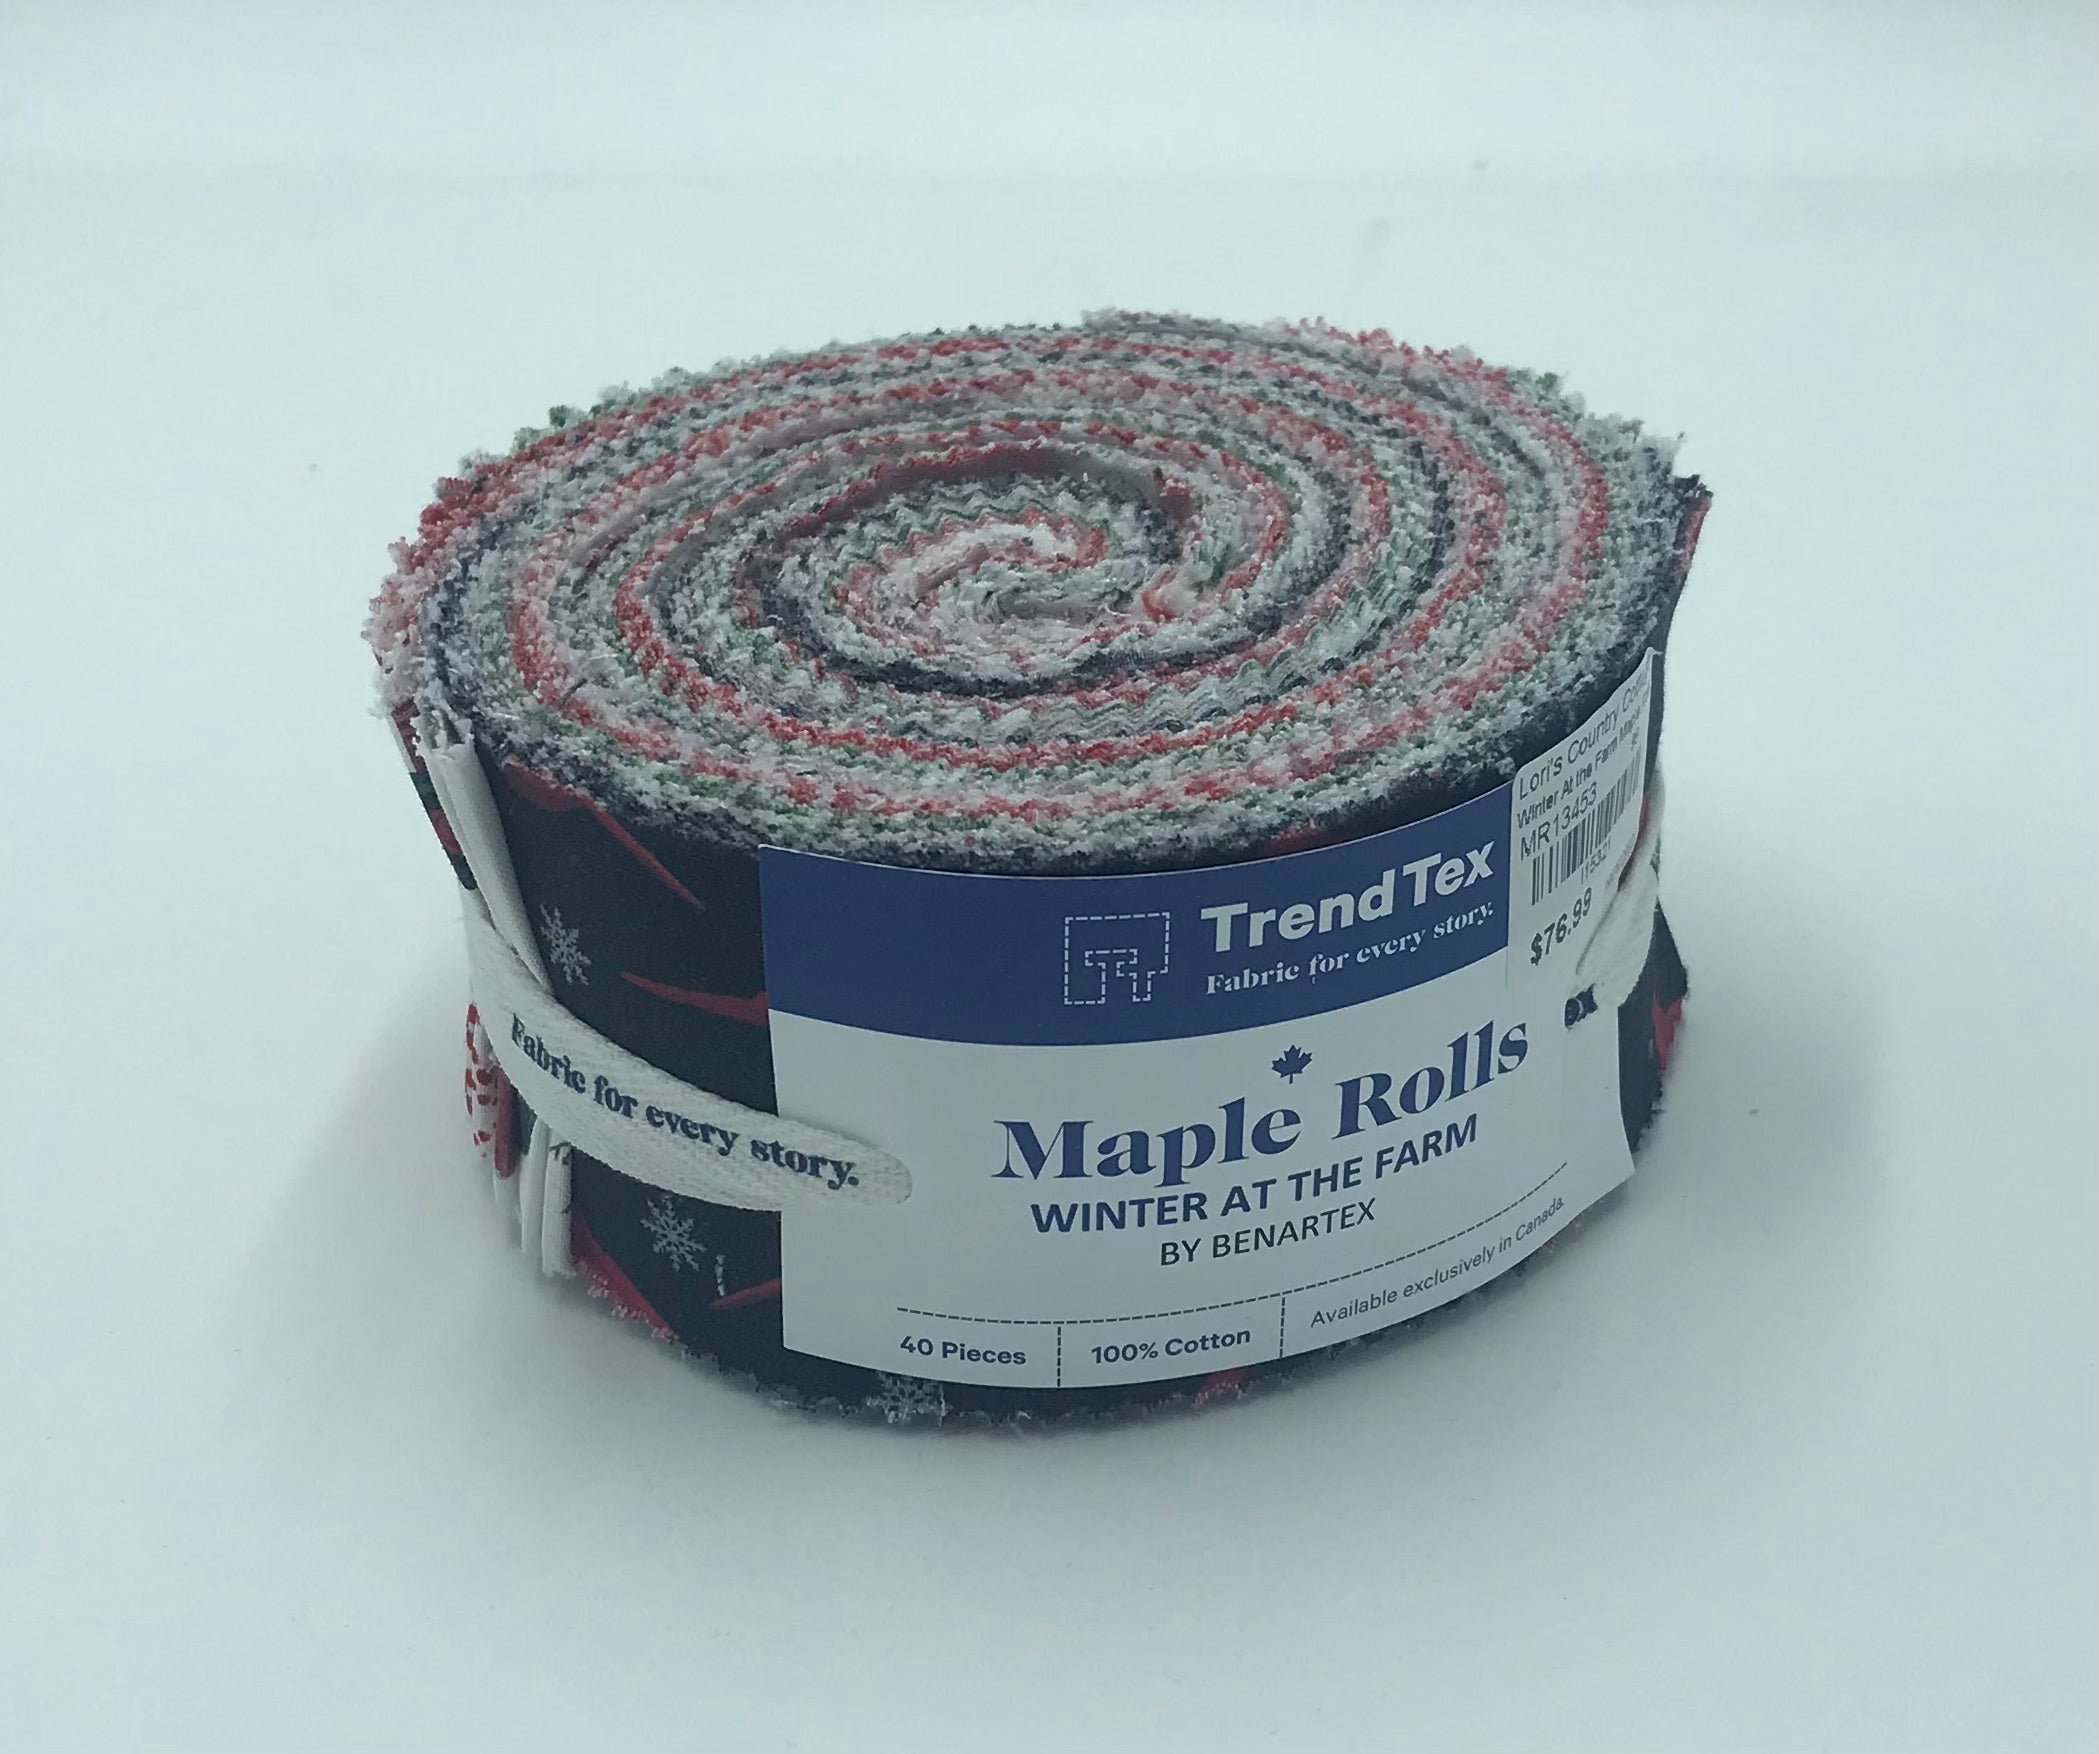 Winter At The Farm - Maple Roll (Jelly Roll) - MR13453